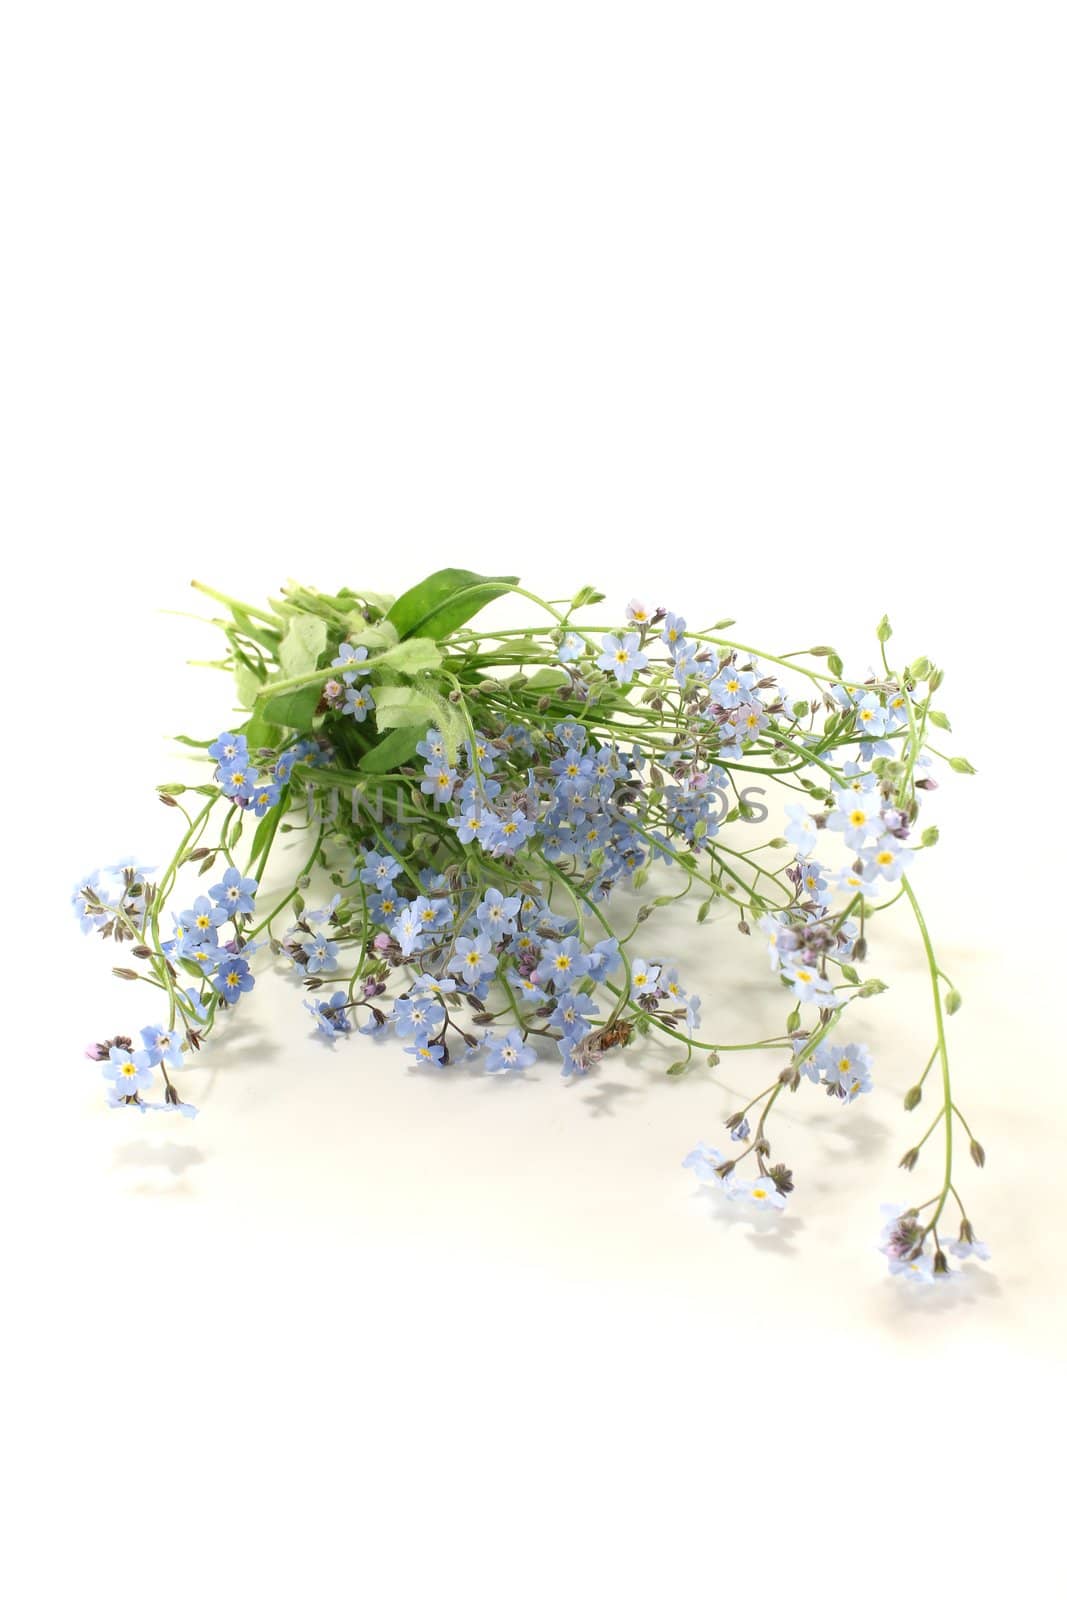 fresh blue speedwell with flowers and leaves on a bright background